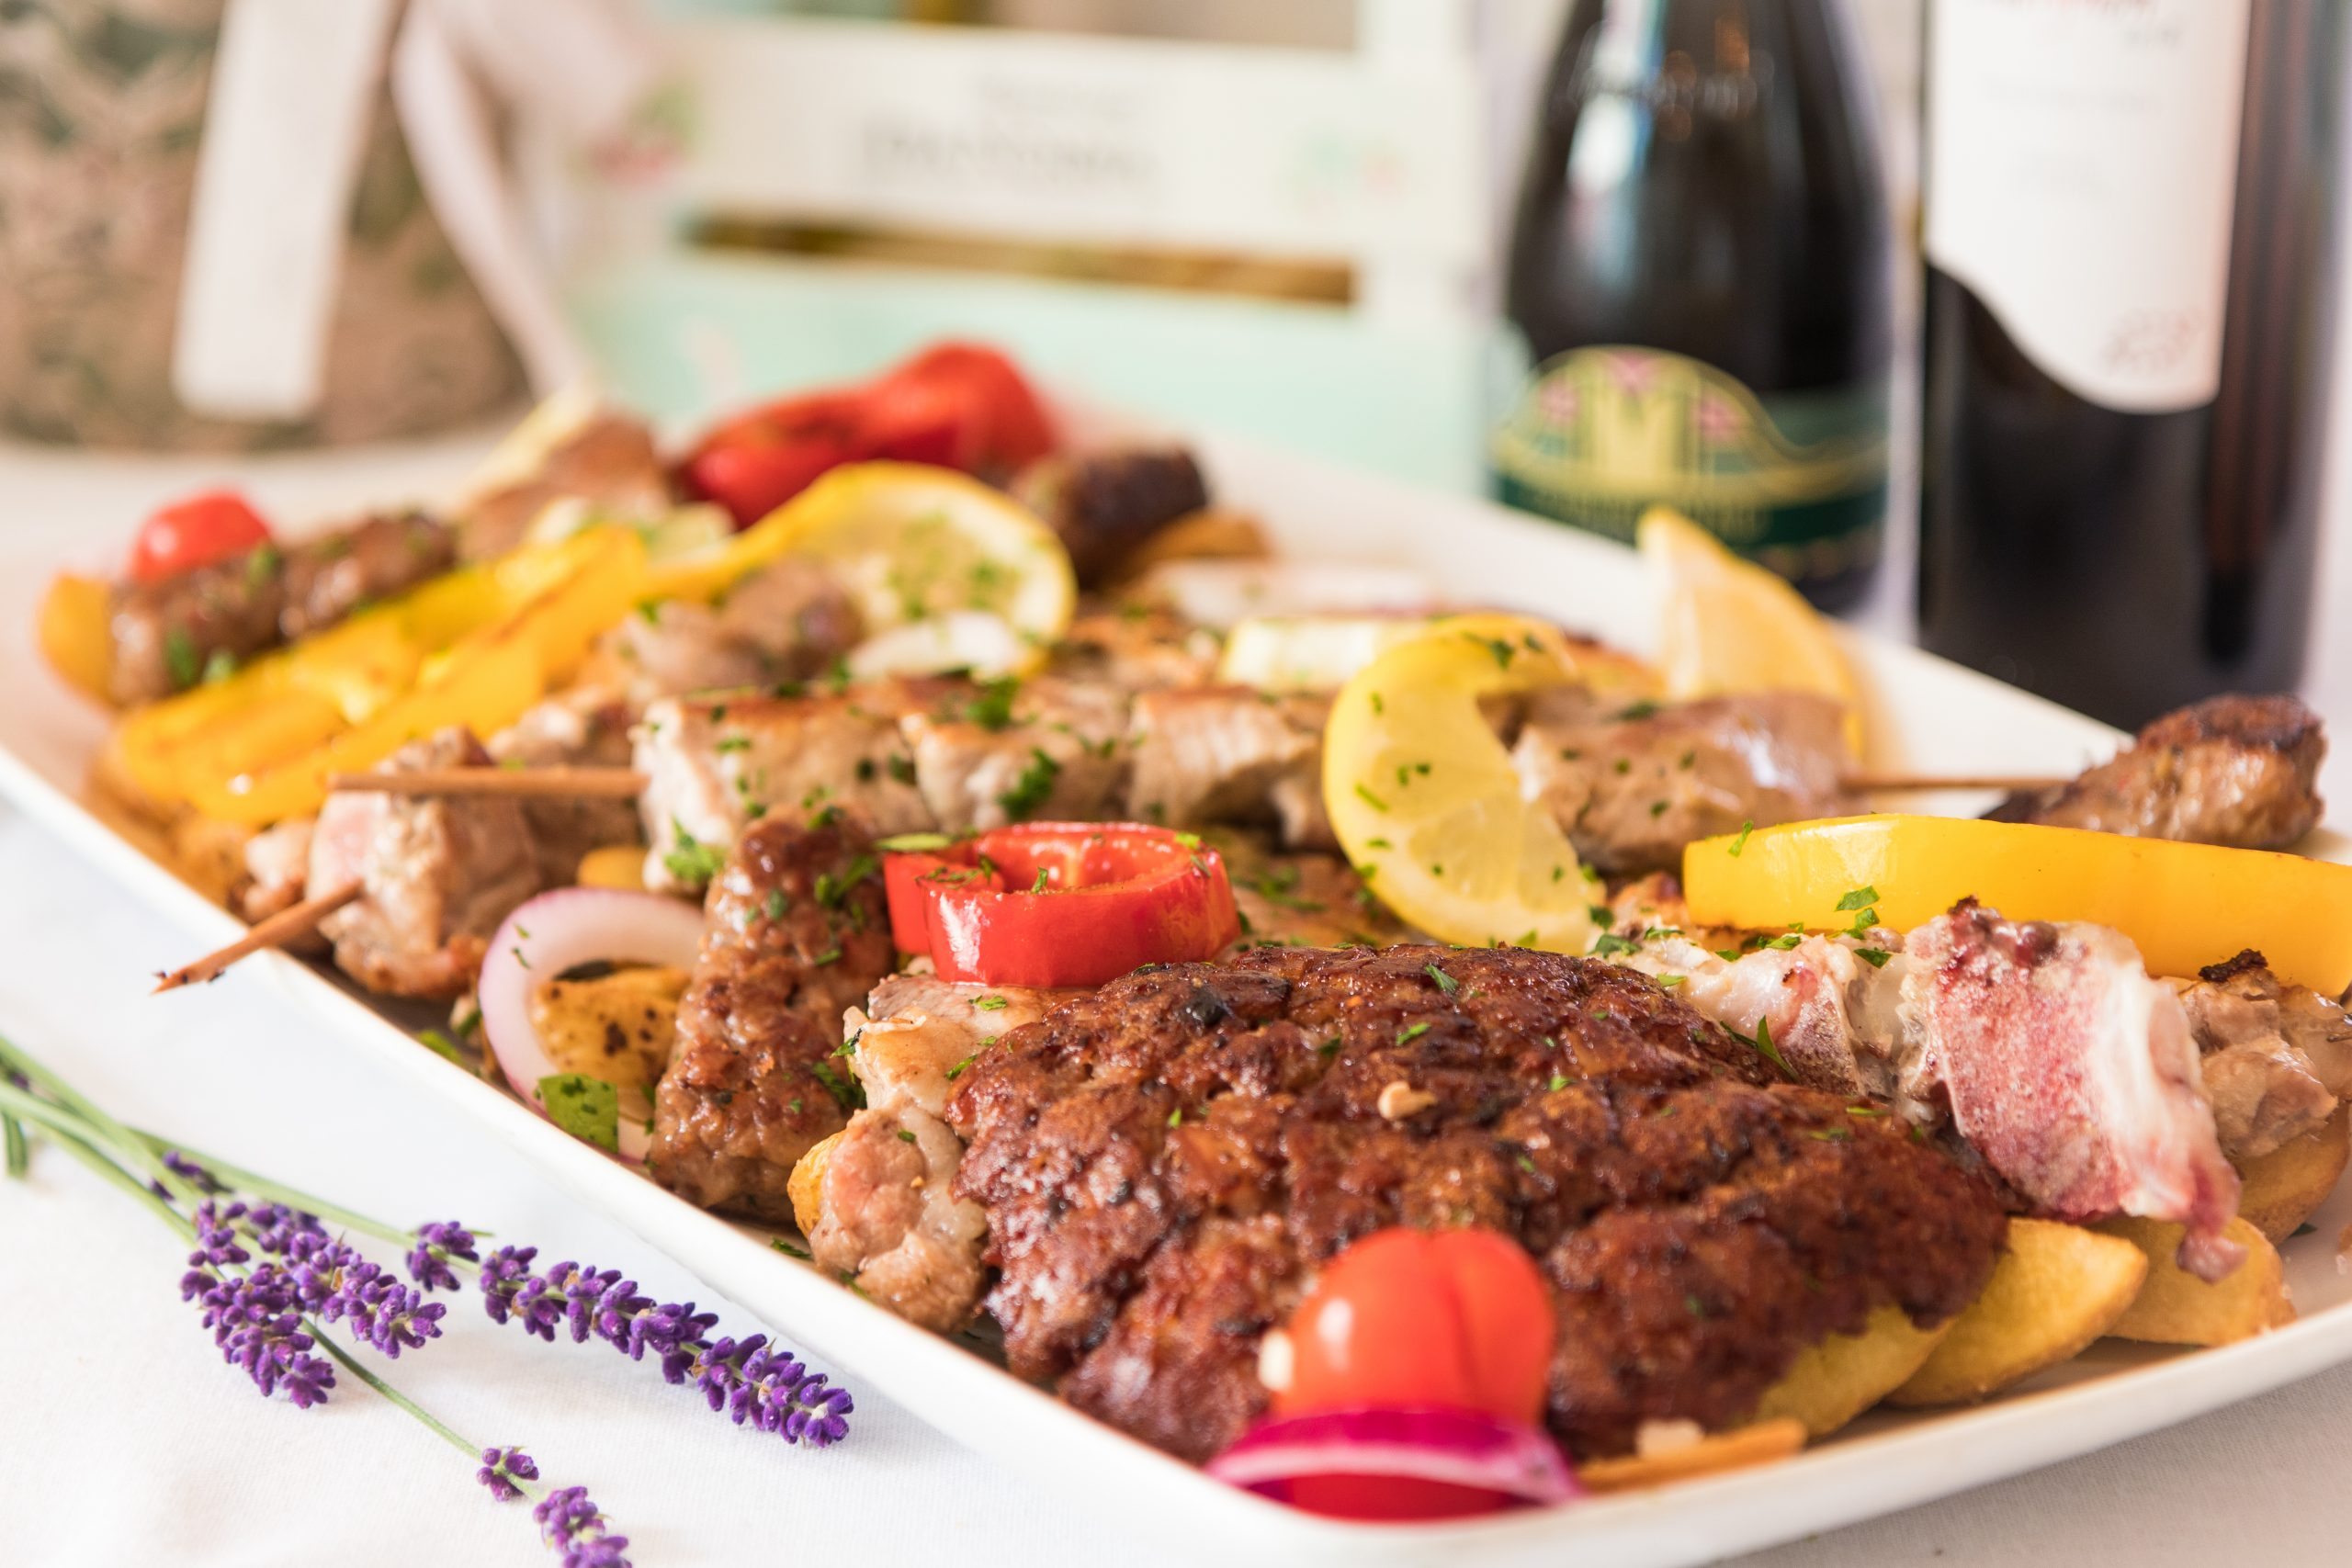 Taste The Traditional Istrian Cuisine During The Motovun Wine Tasting And Walking Tour From Riejka